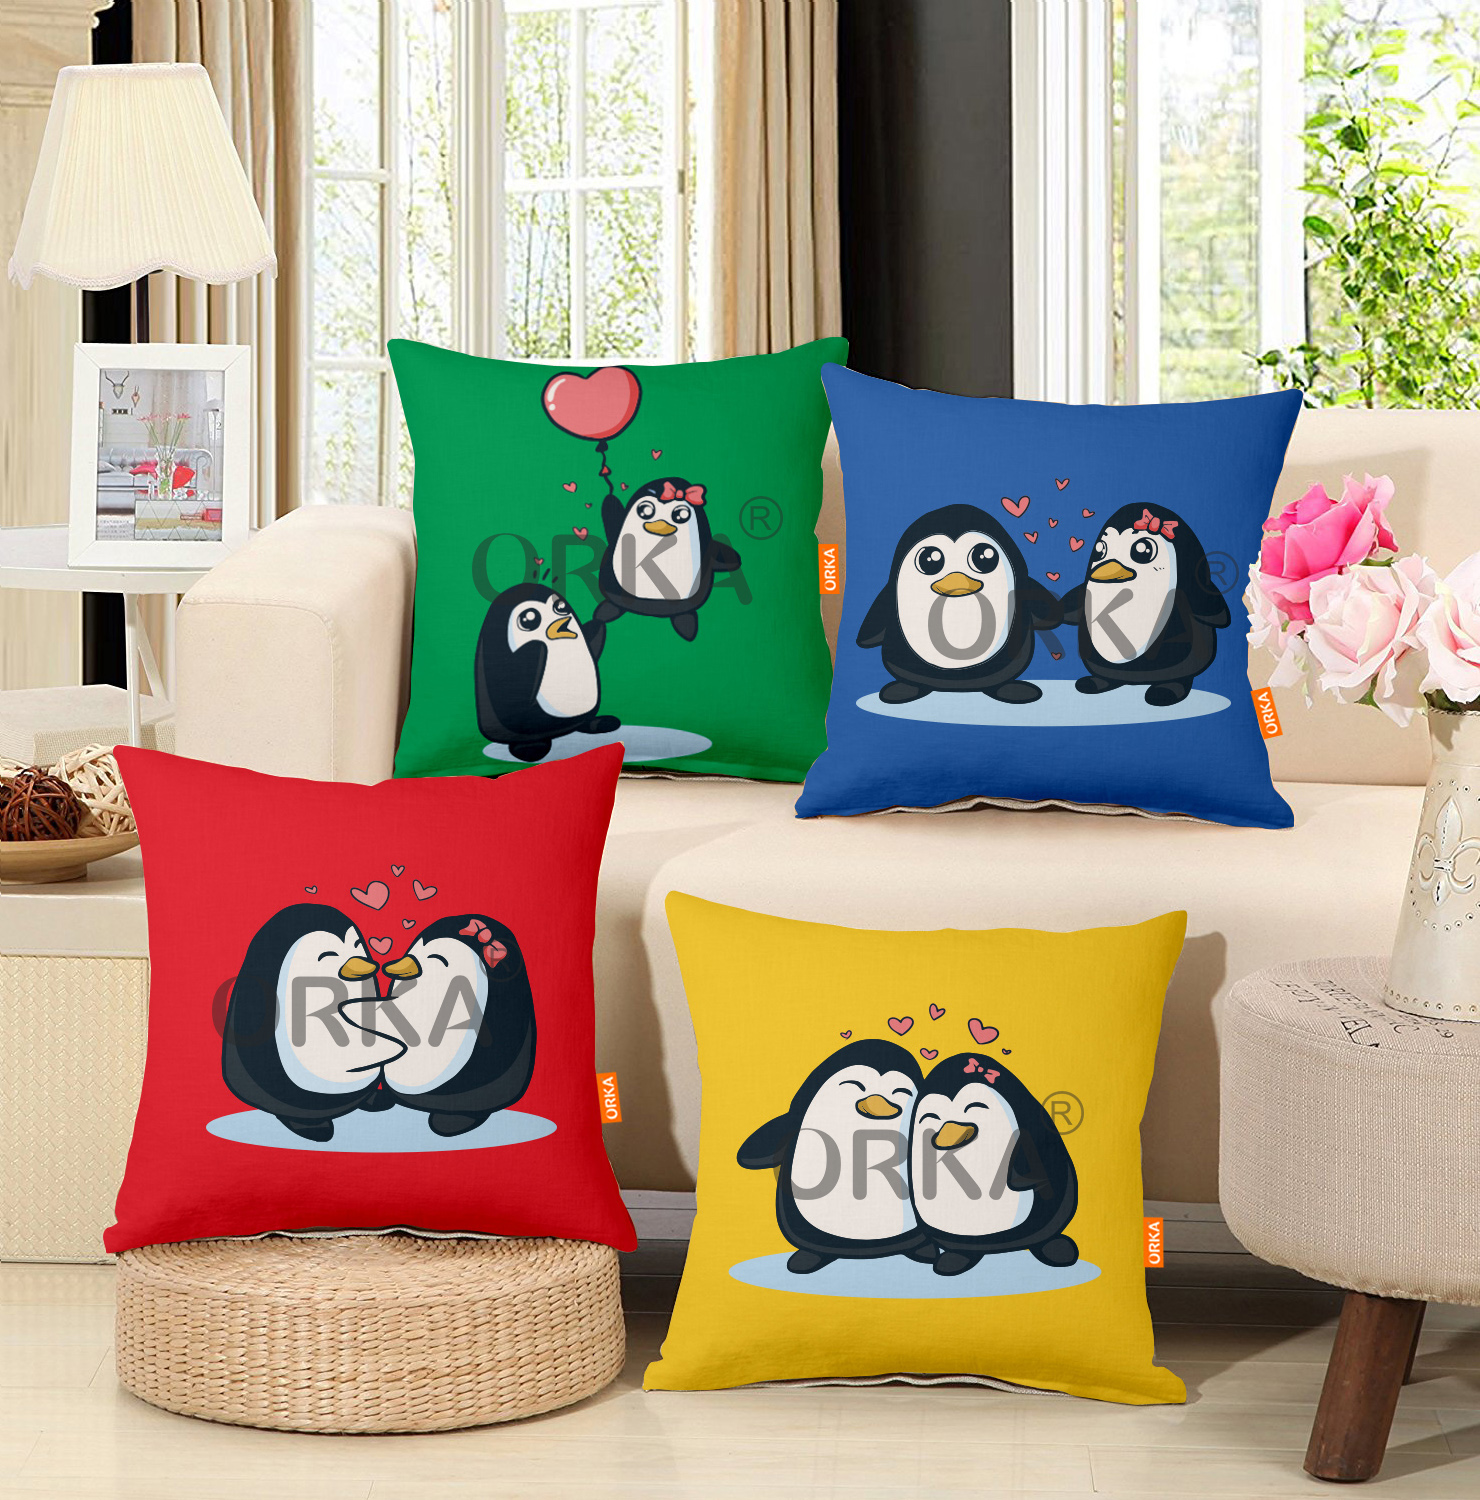 ORKA Set Of 4 Digital Printed Cushion Penguin Printed 14"x14" Cover Only